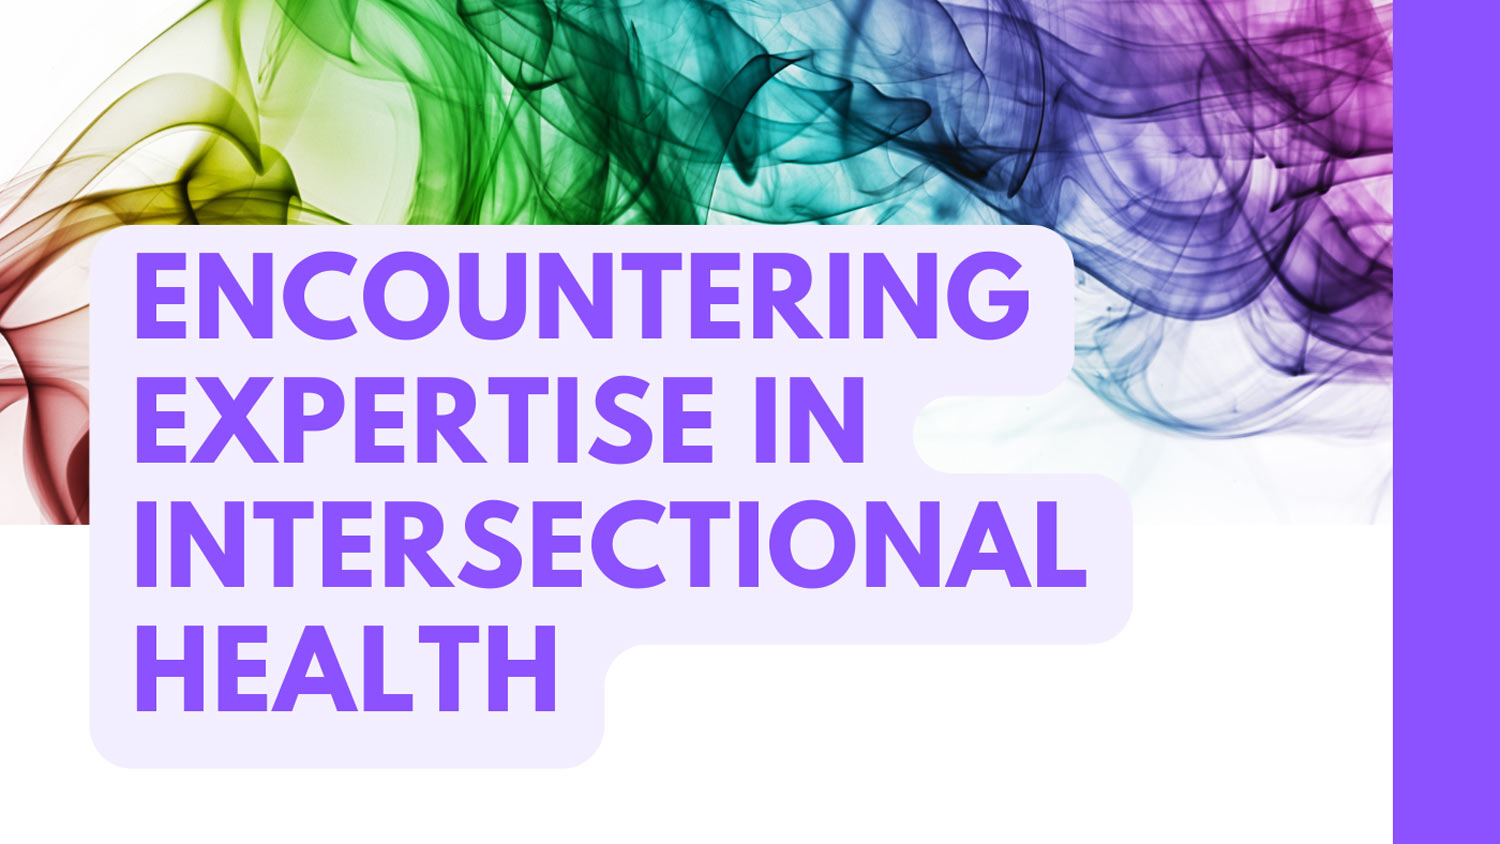 Encountering Expertise in Intersectional Health event series